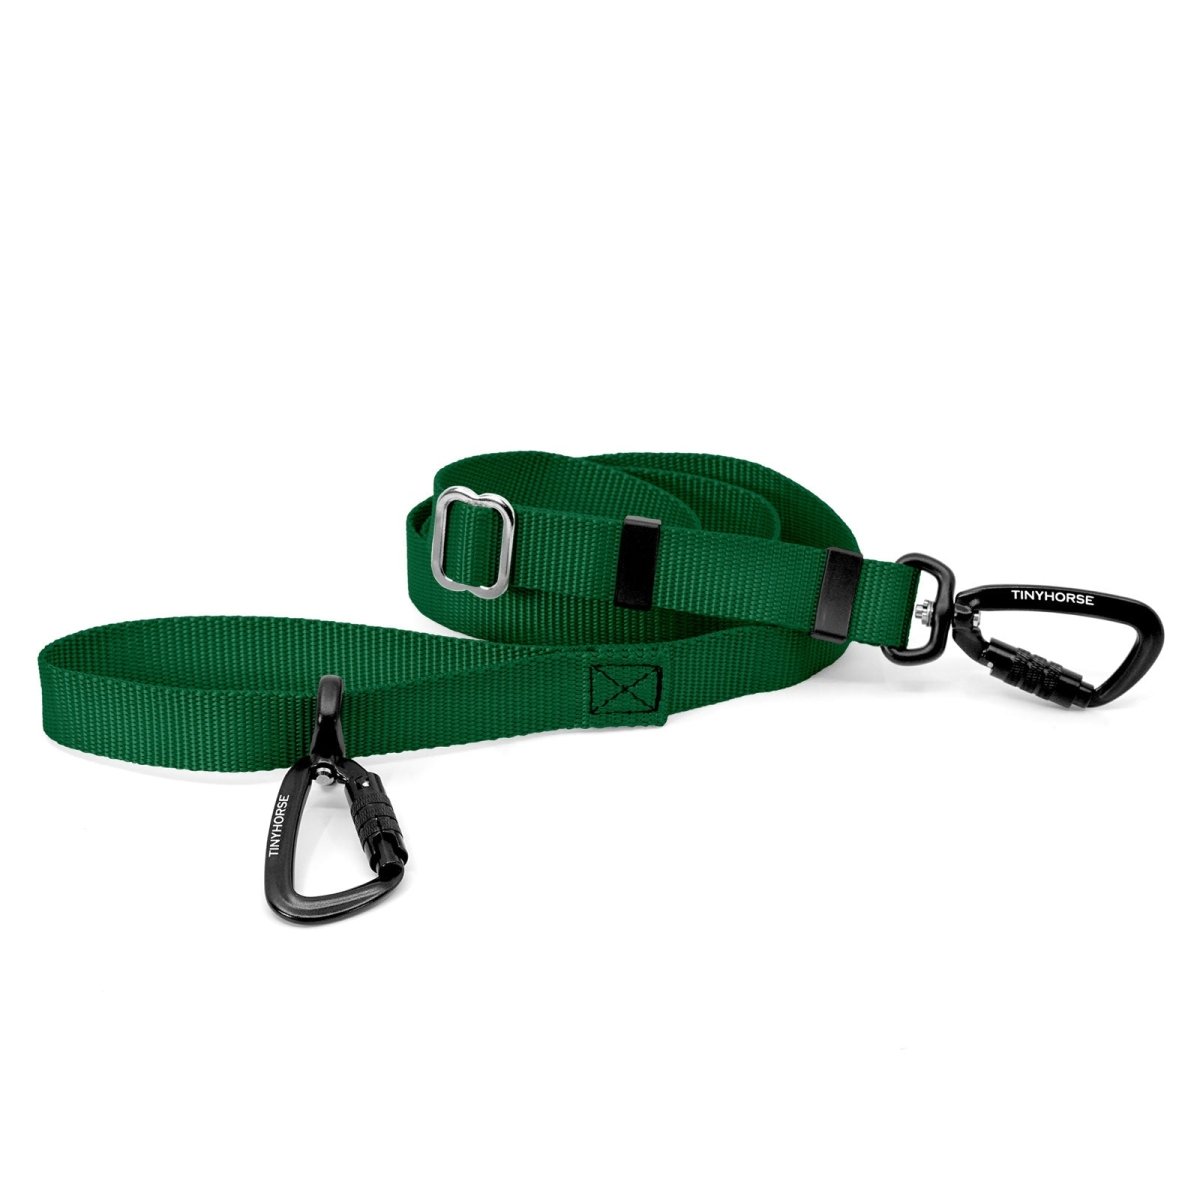 A green-coloured Lead-All Lite Extra with an adjustable nylon webbing leash and 2 auto-locking carabiners